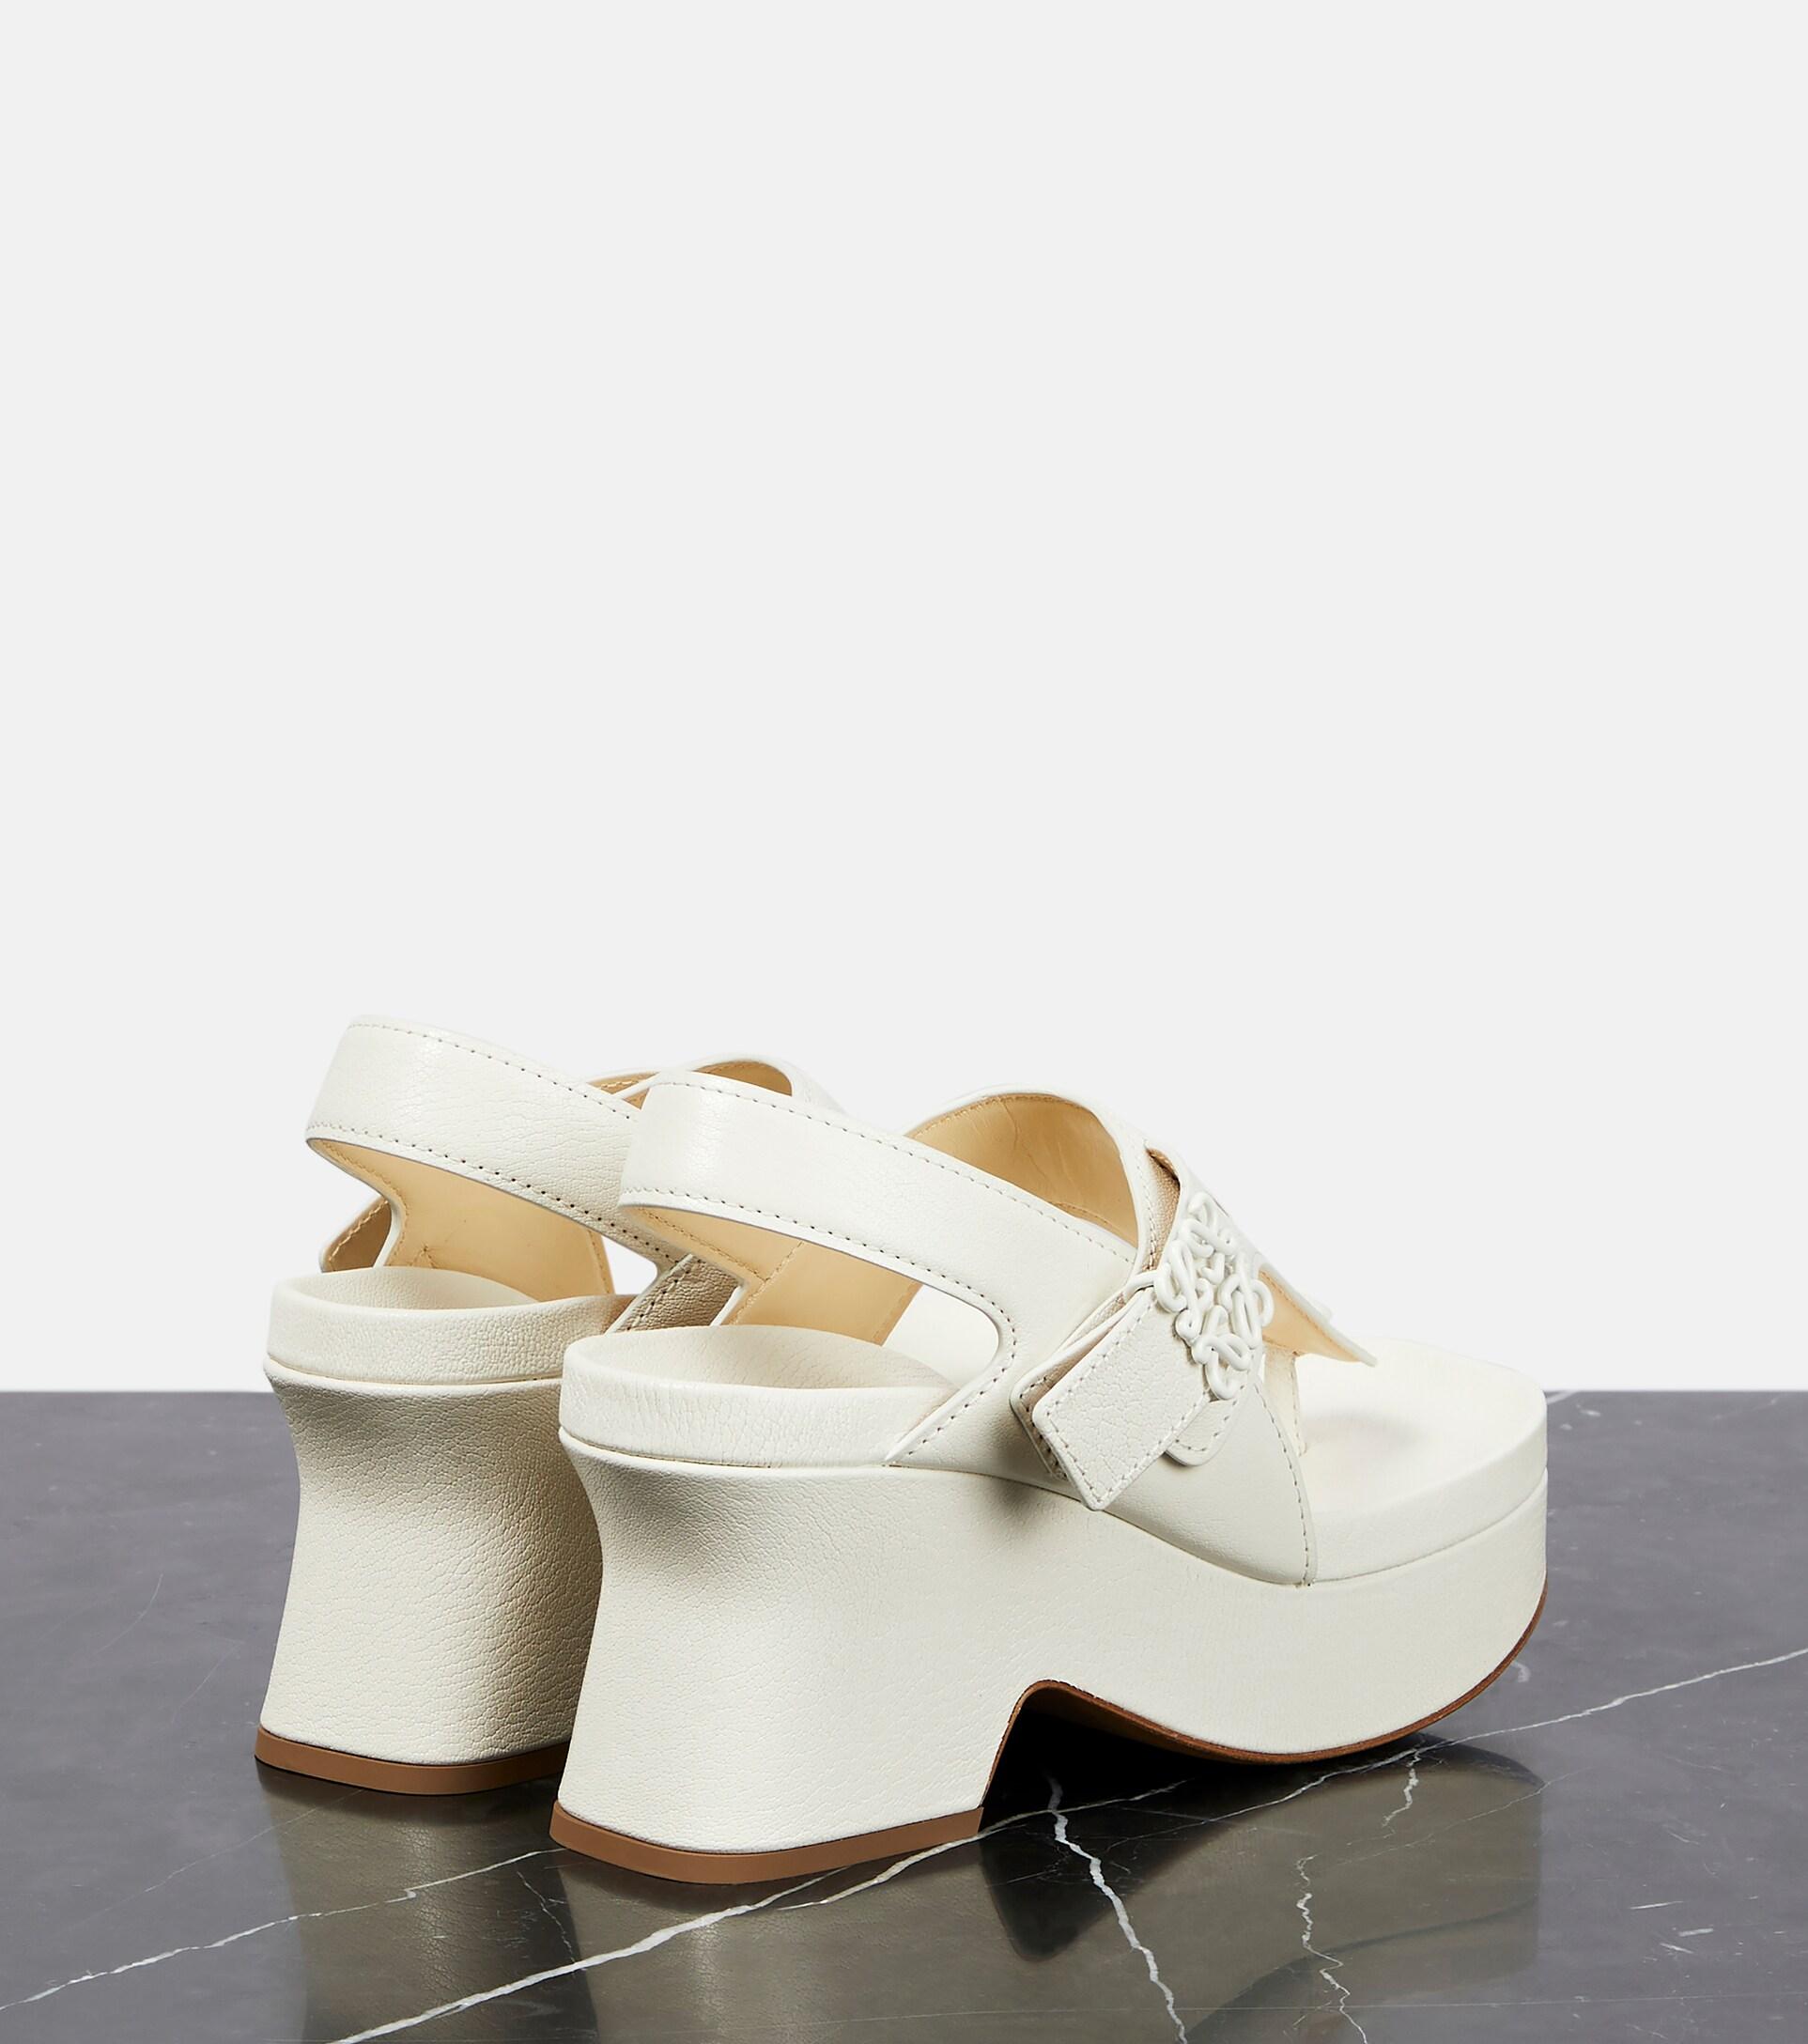 Loewe Ease Leather Platform Thong Sandals in White | Lyst